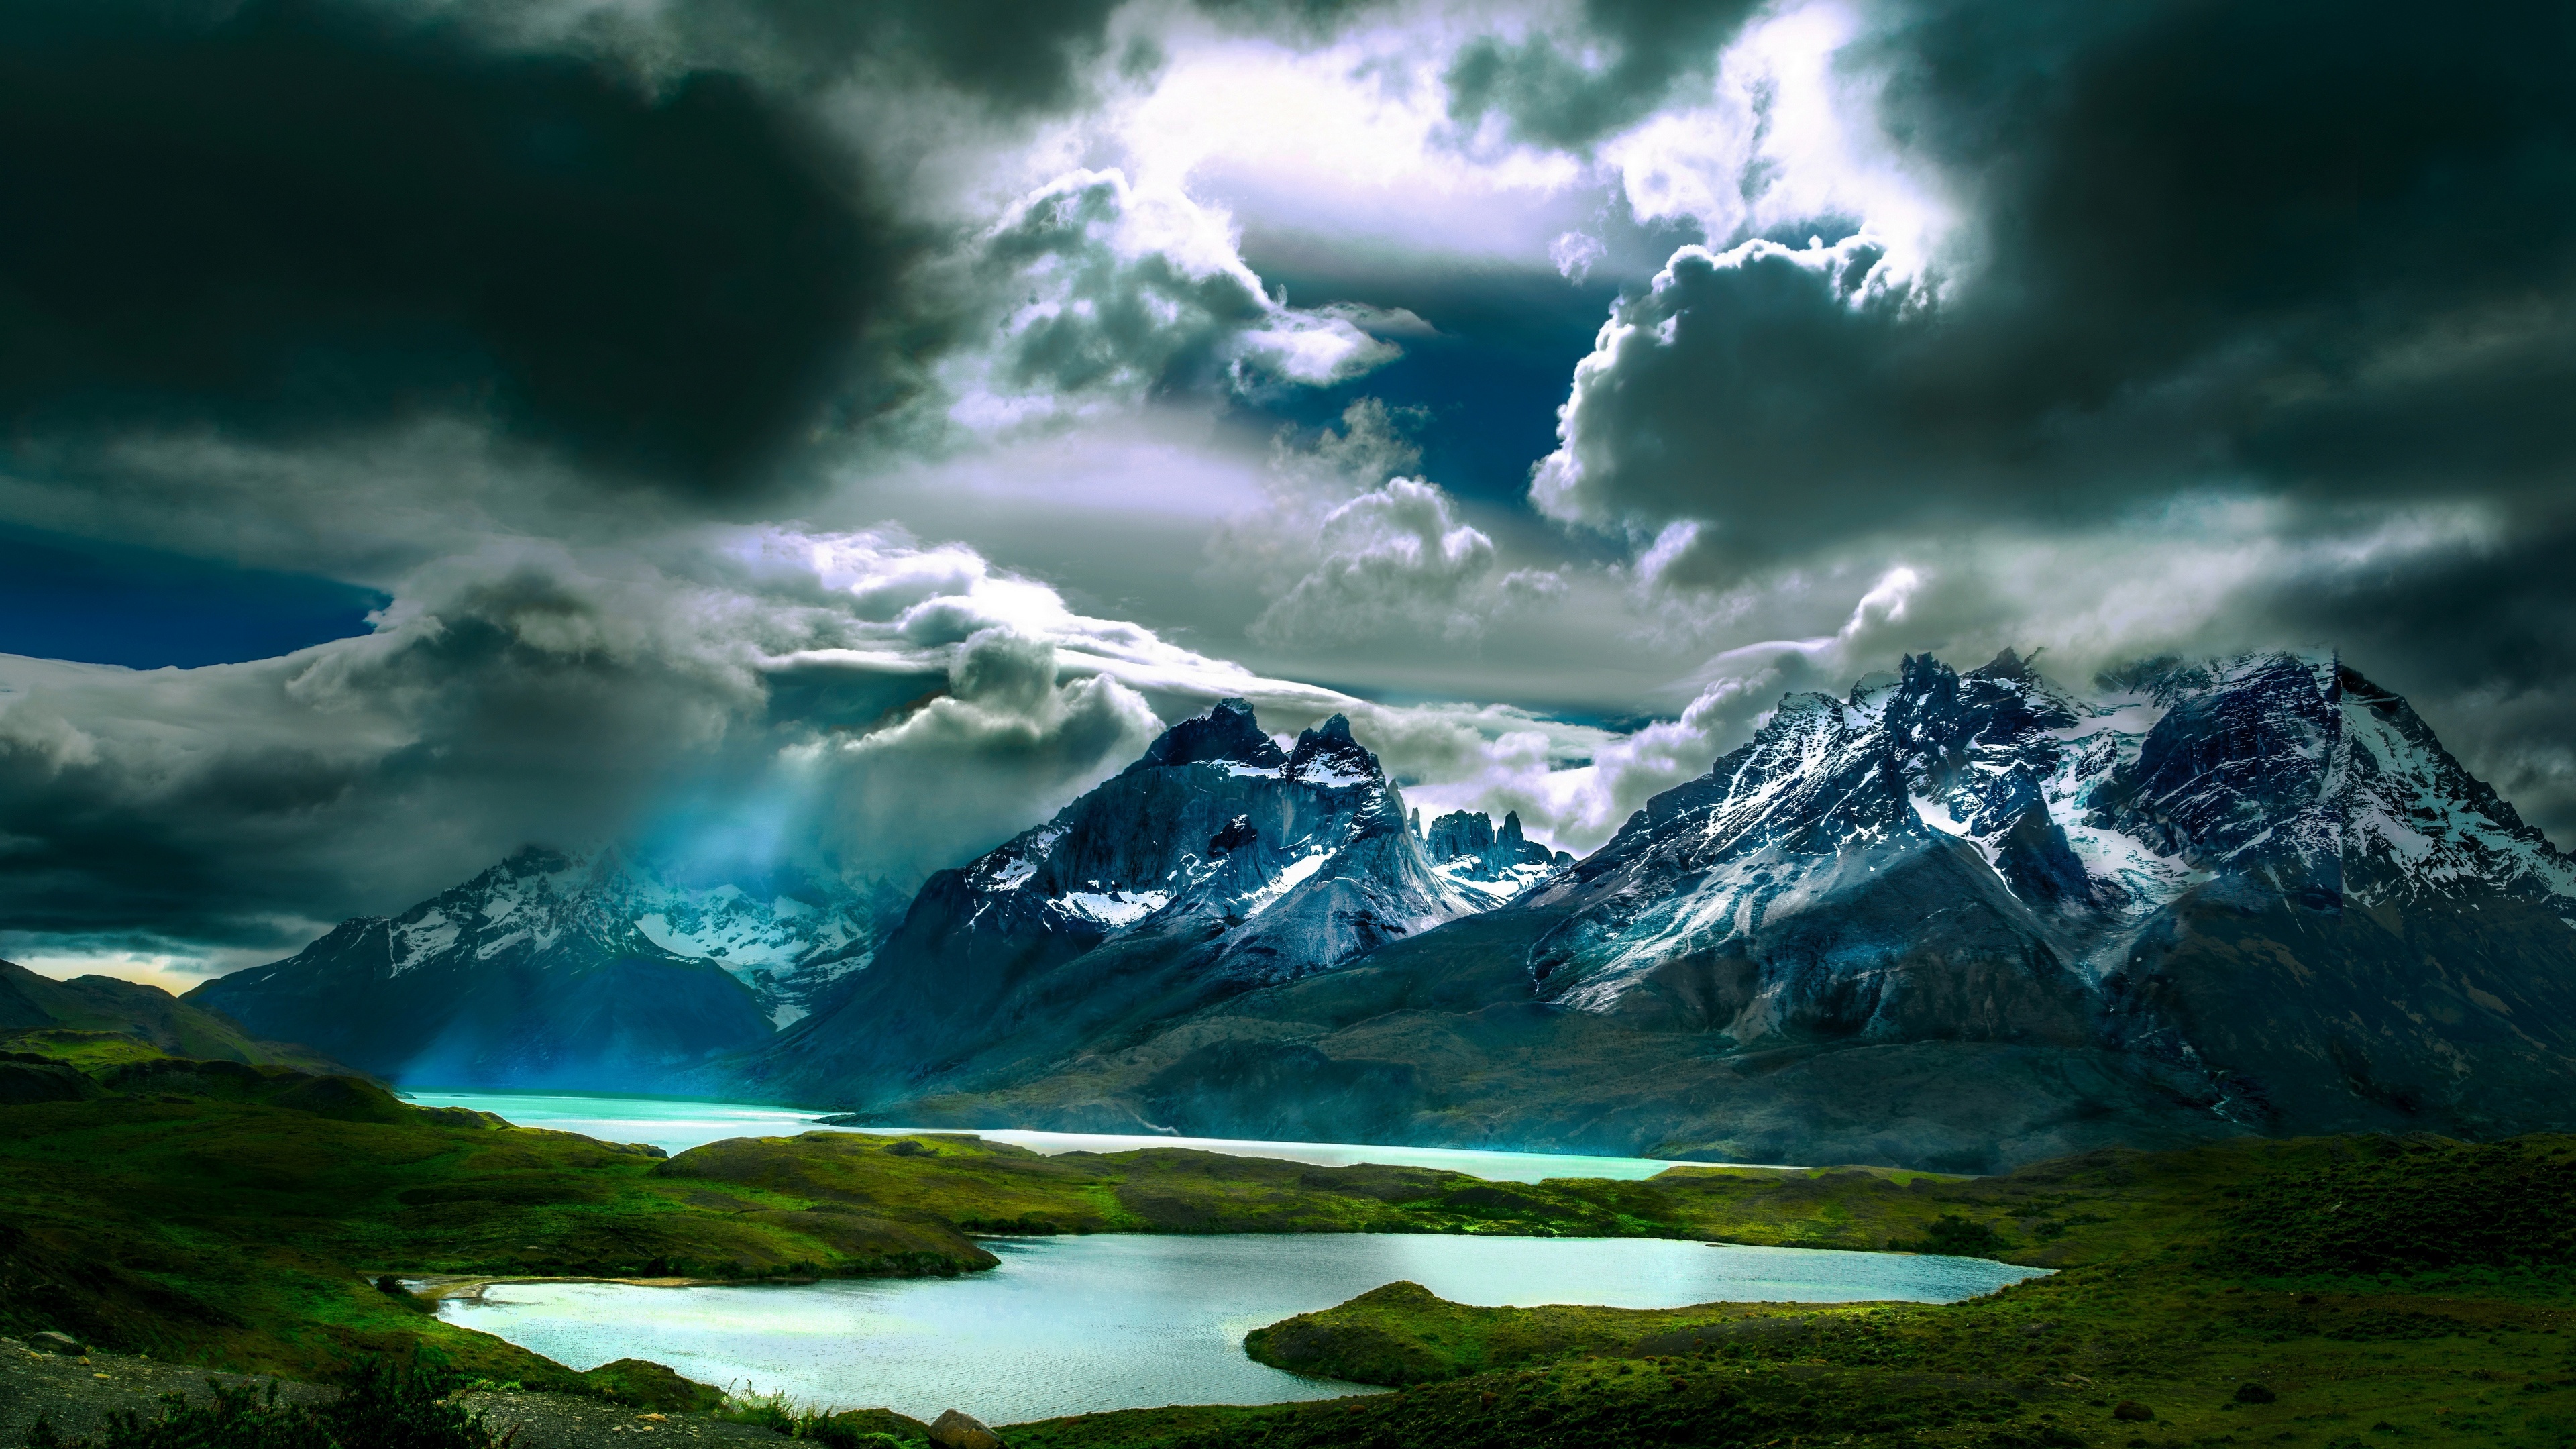 General 3840x2160 Argentina nature landscape mountains lake sky clouds